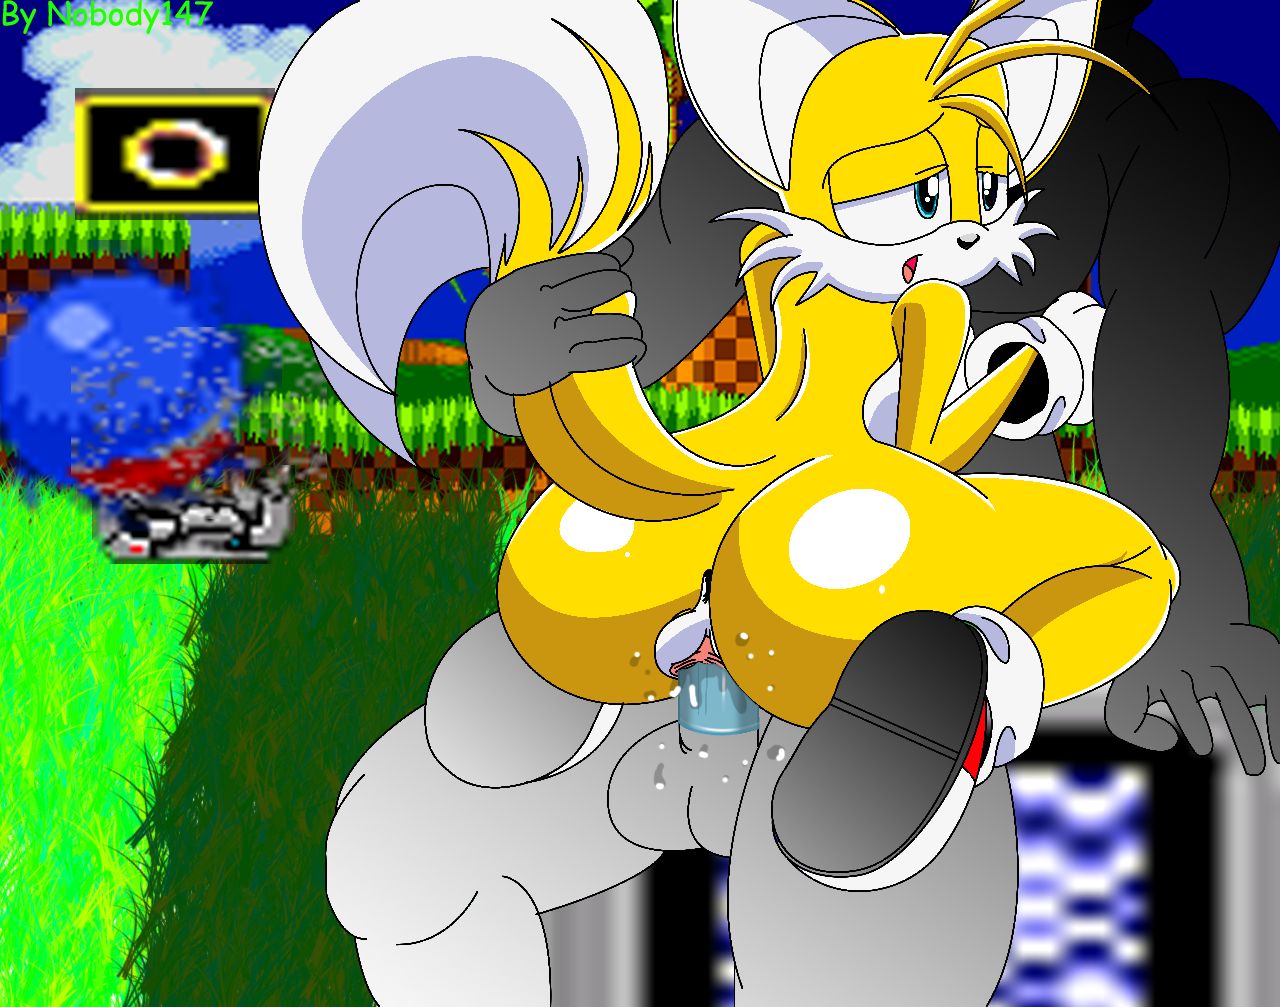 Sonic and Tails Series (Sonic The Hedgehog) 18+ Porn Comics